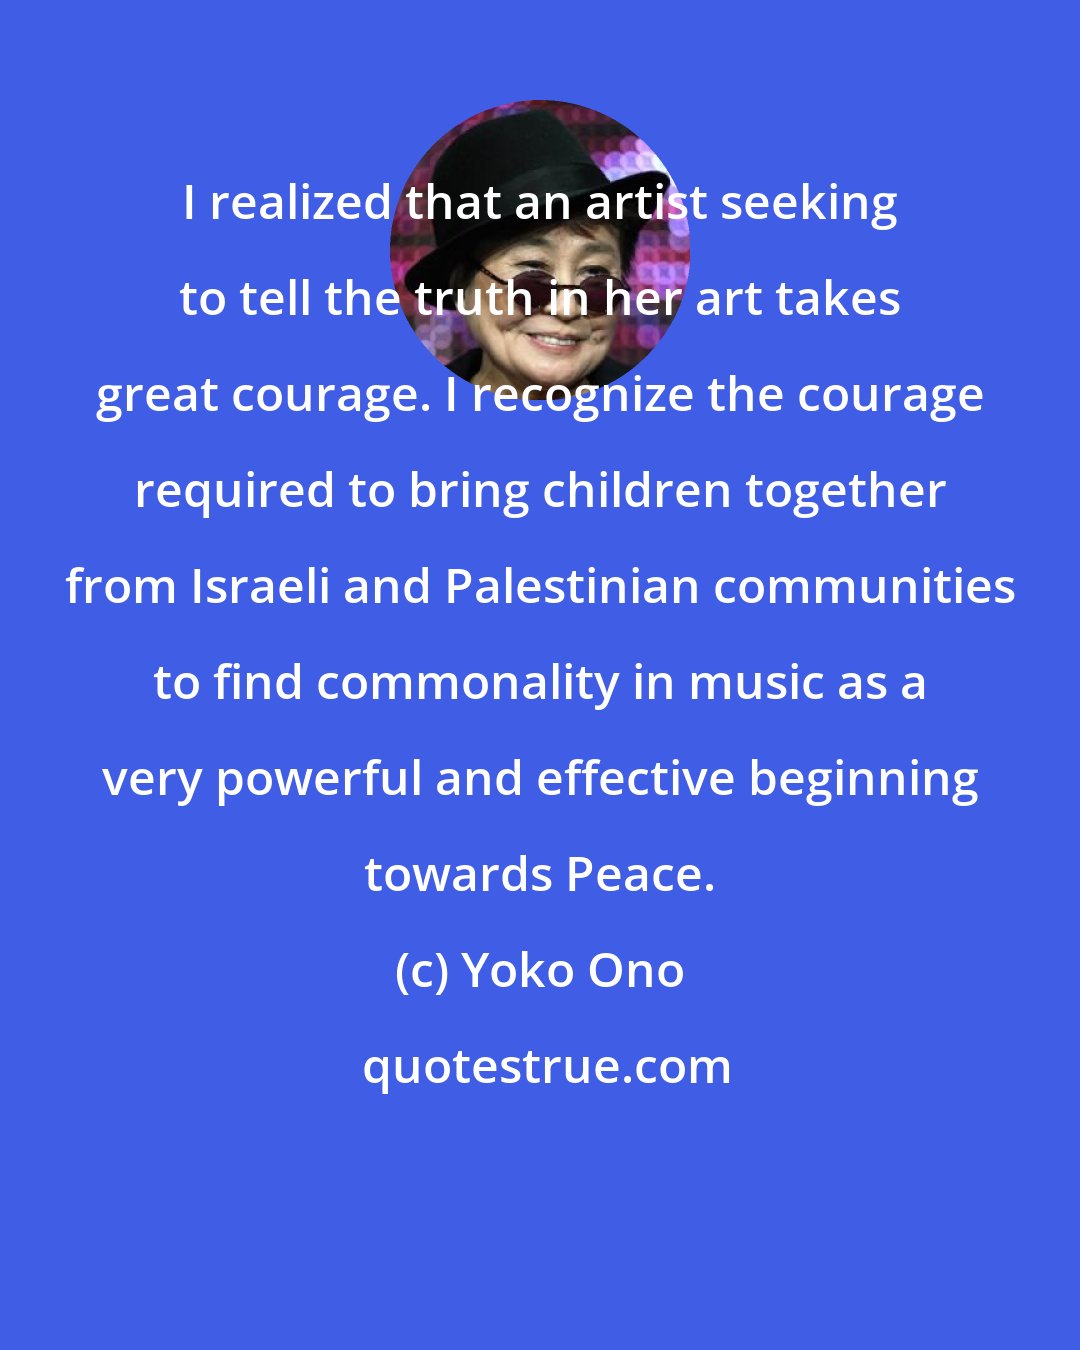 Yoko Ono: I realized that an artist seeking to tell the truth in her art takes great courage. I recognize the courage required to bring children together from Israeli and Palestinian communities to find commonality in music as a very powerful and effective beginning towards Peace.